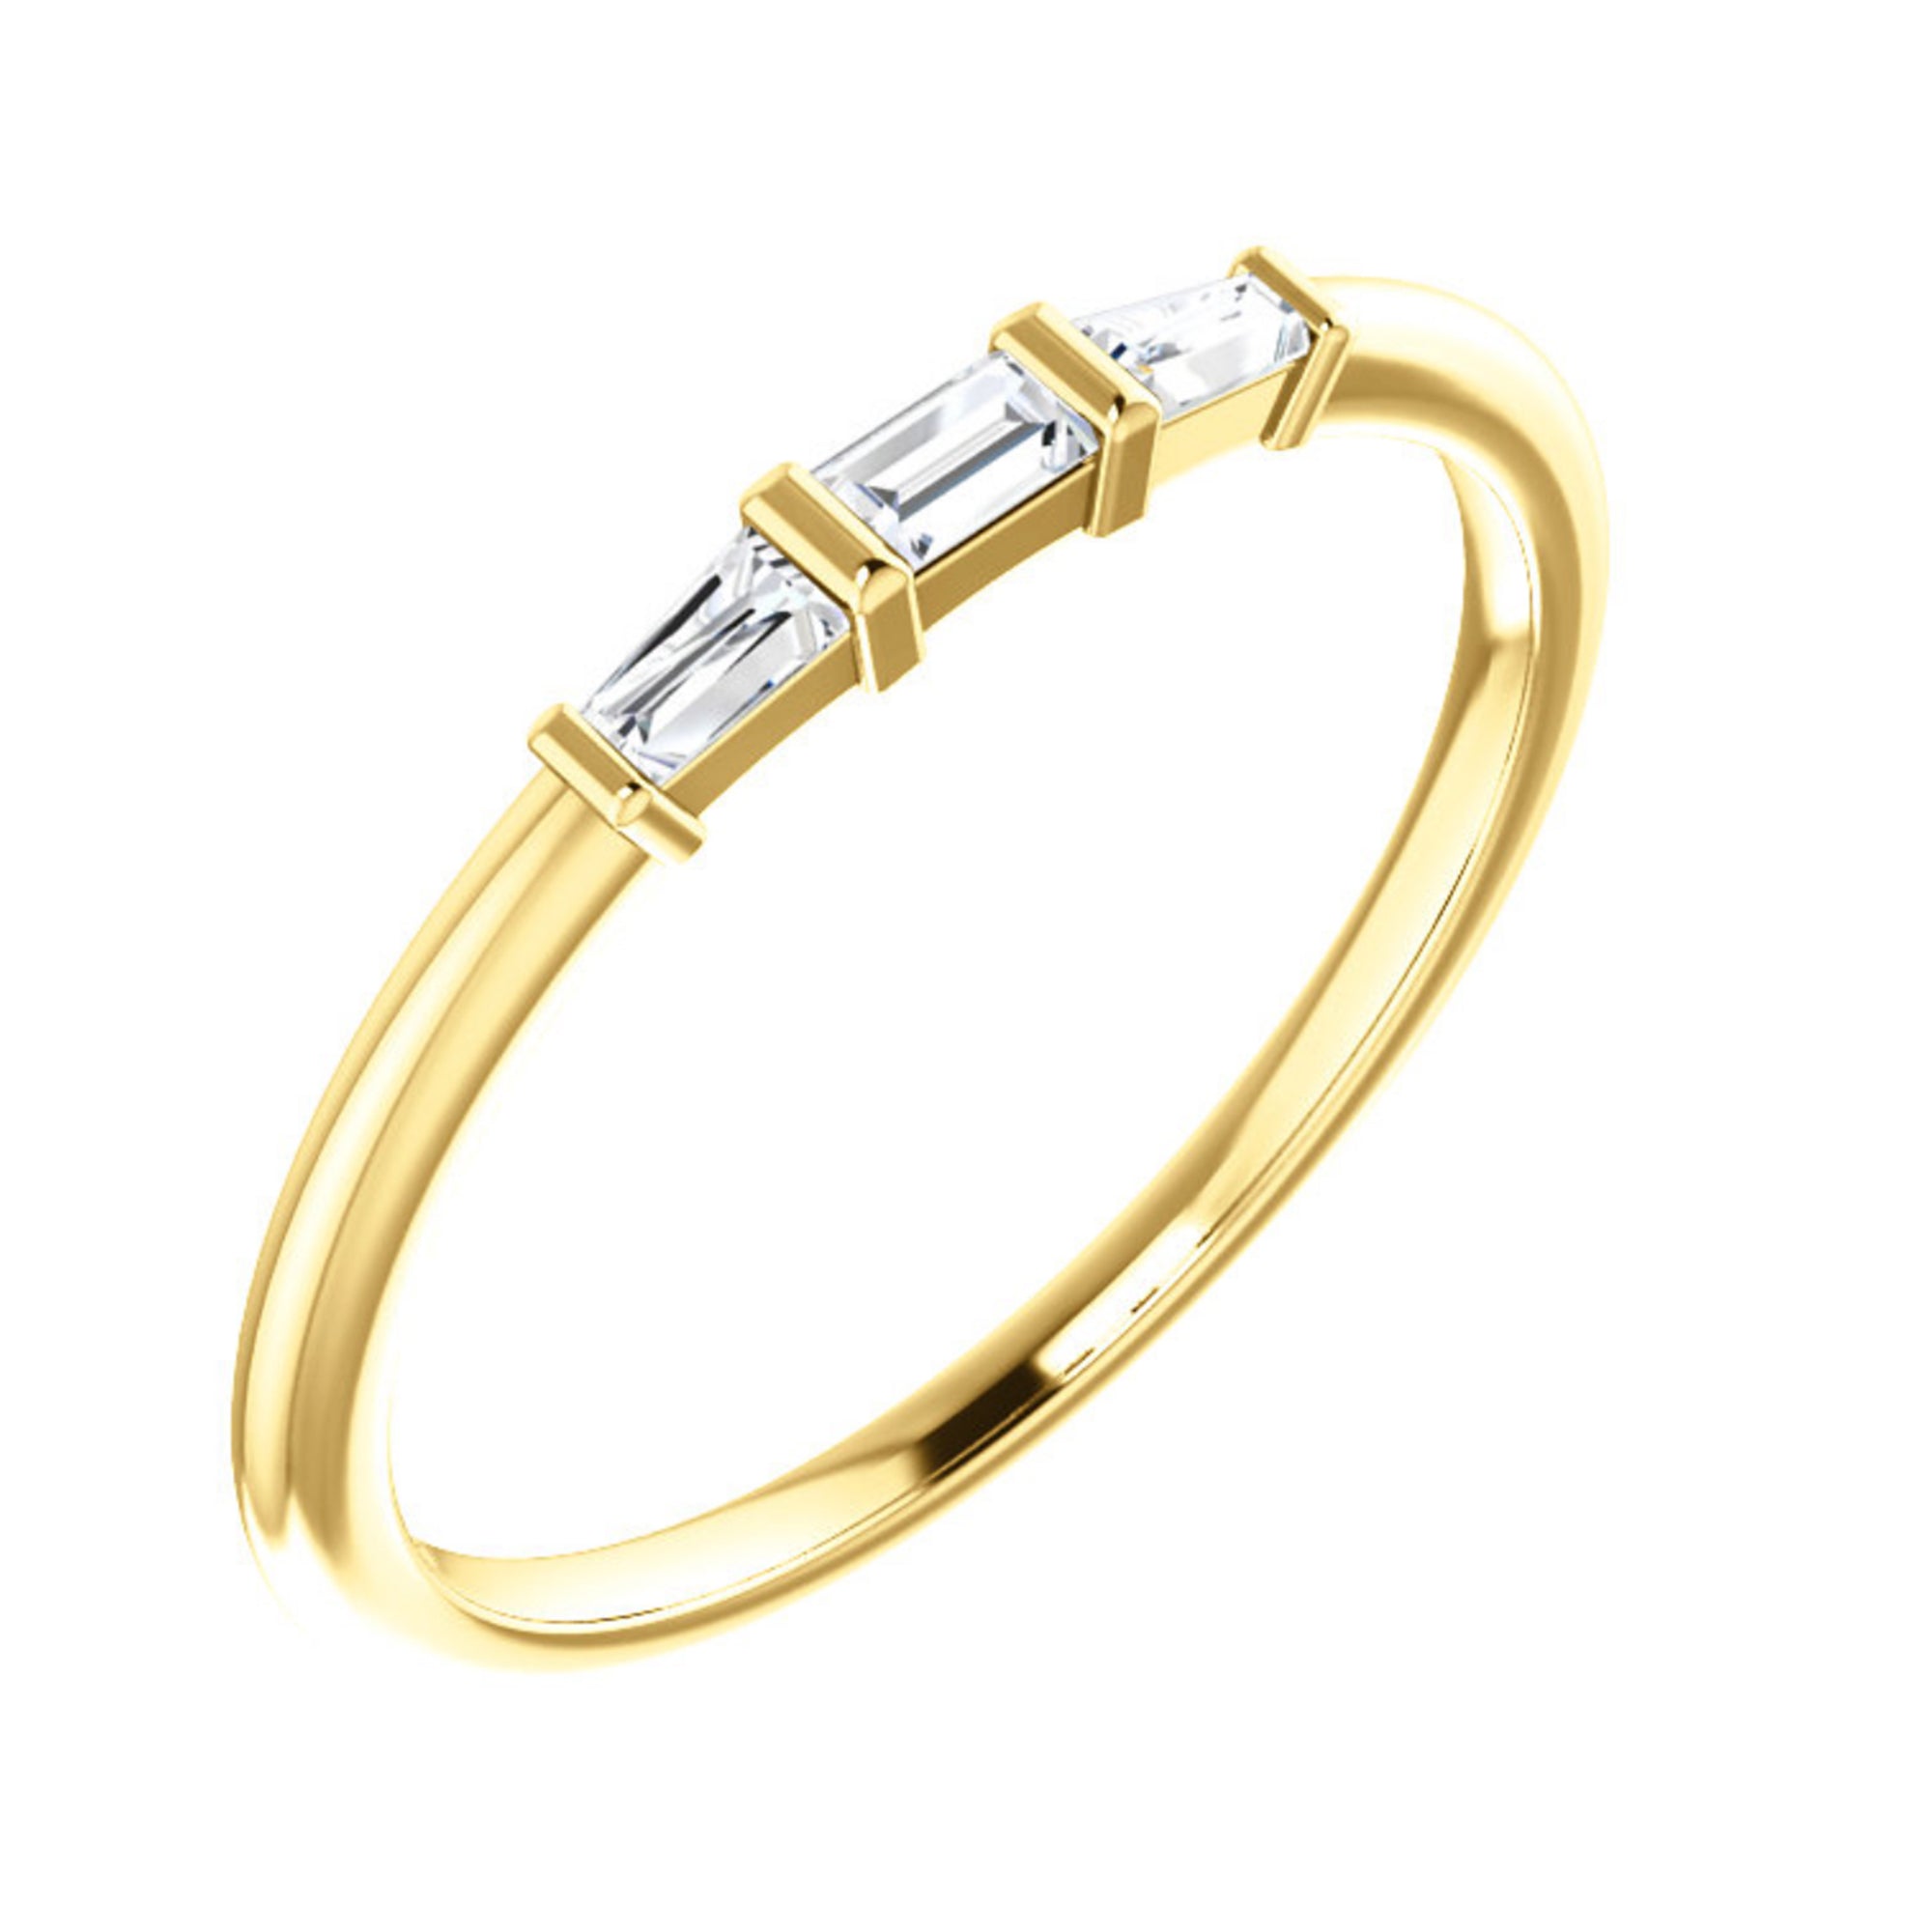 Diamond Baguette 3-Stone Ring in White, Yellow or Rose Gold - Talisman Collection Fine Jewelers